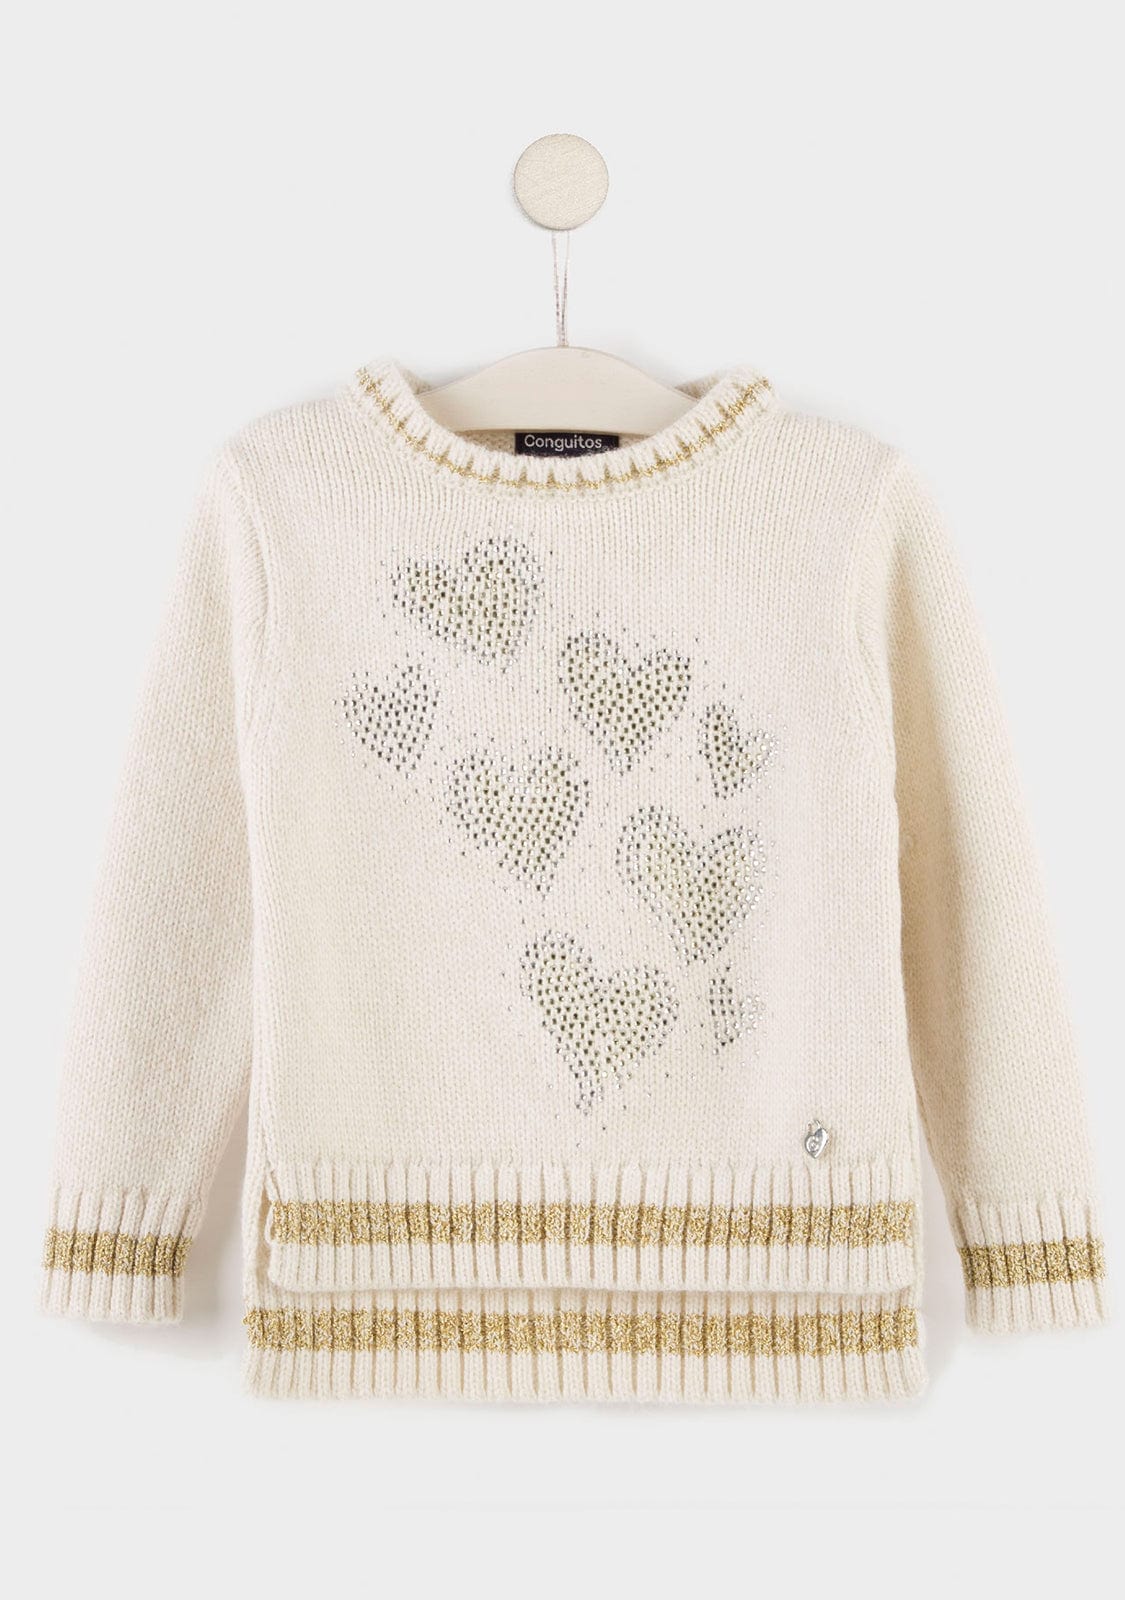 CONGUITOS TEXTIL Clothing Girl's Beige Strass Hearts Jersey